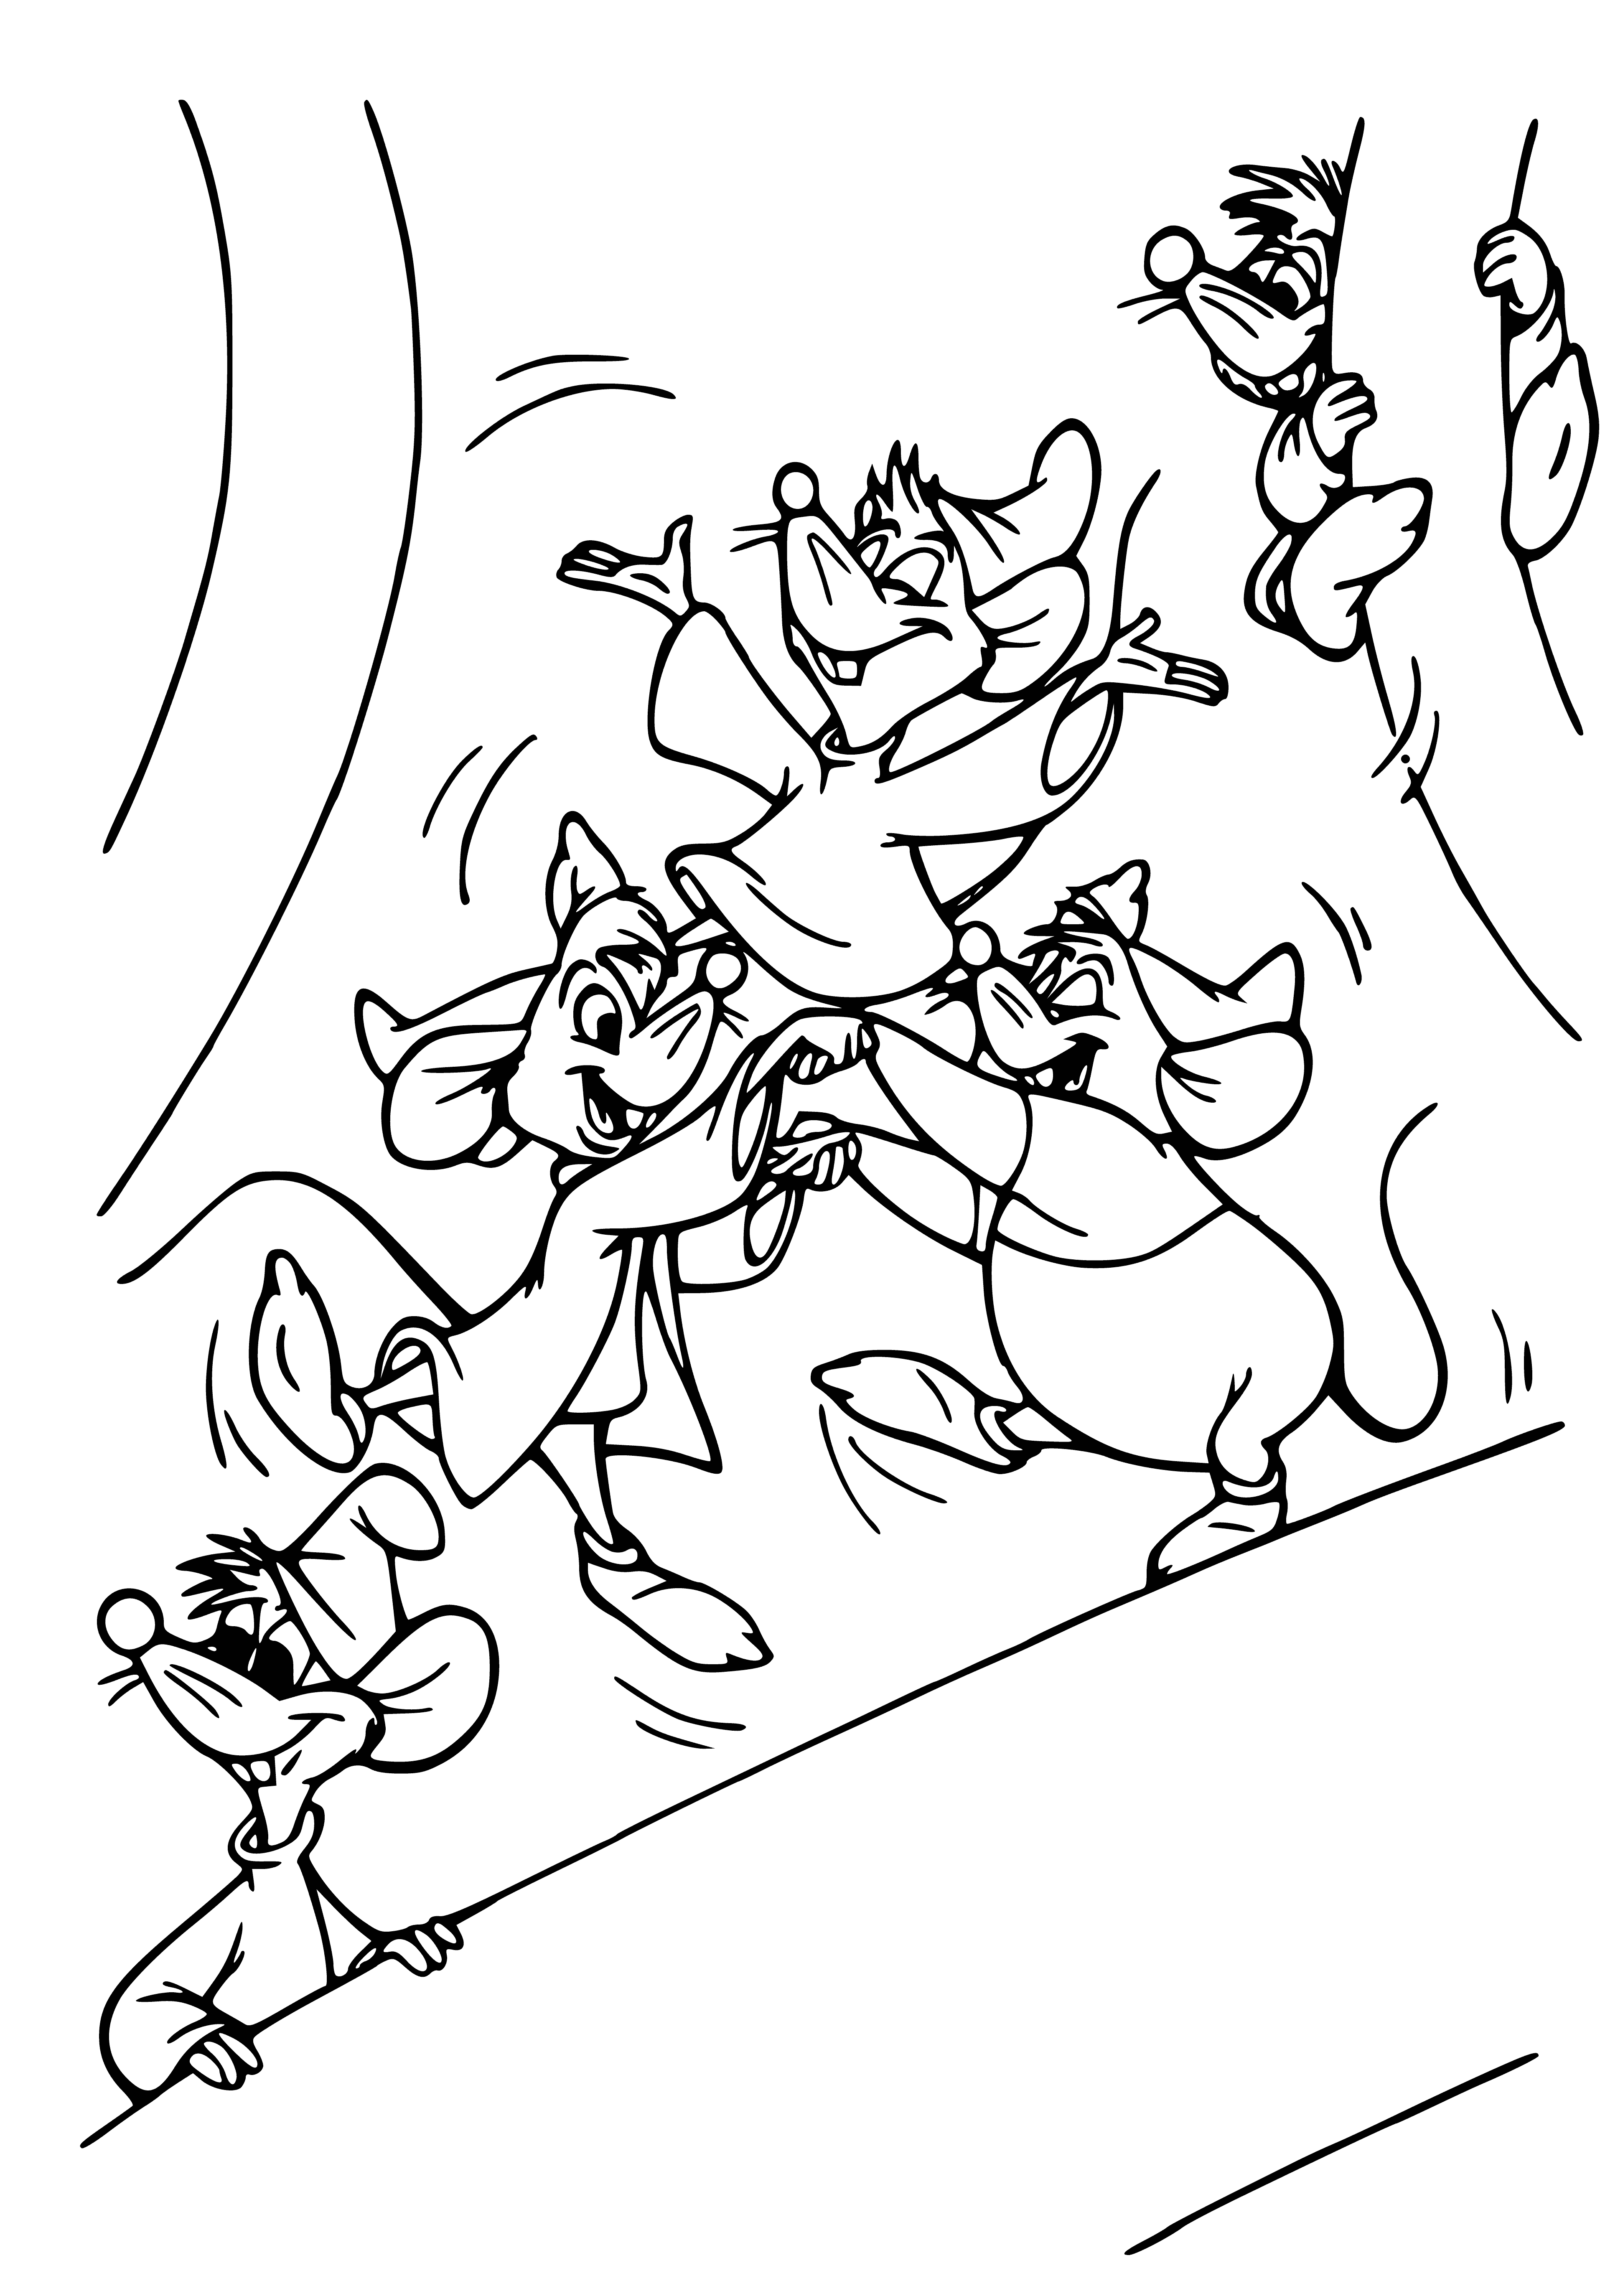 coloring page: Mice delight in the Cinderella coloring page w/ 4 surrounding a purple pumpkin, hands on it & smiling.